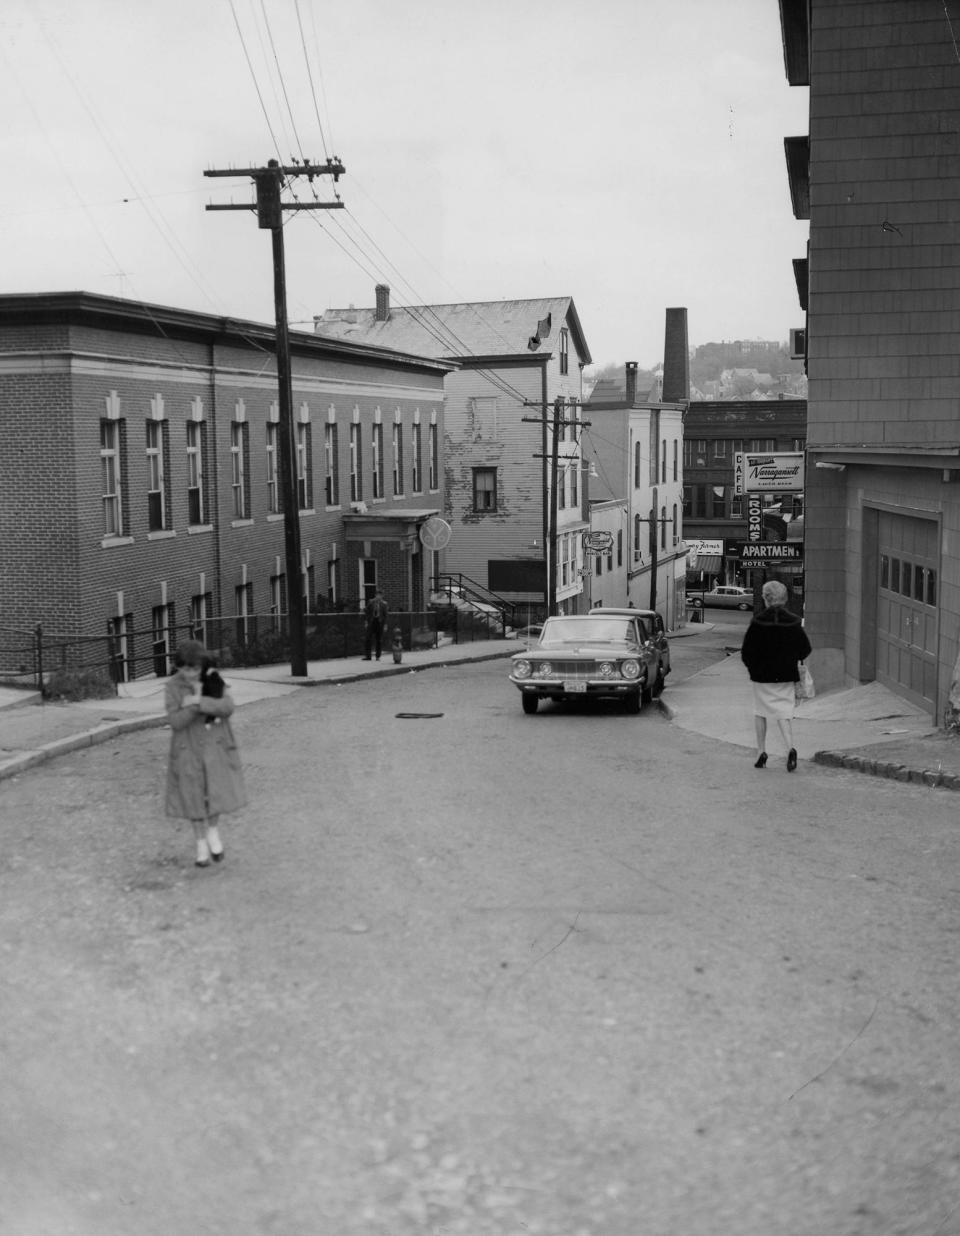 Living in a single rented room was once commonplace in Woonsocket, as evidenced by the sign advertising "Rooms" in this 1962 photo of Ascension Street.